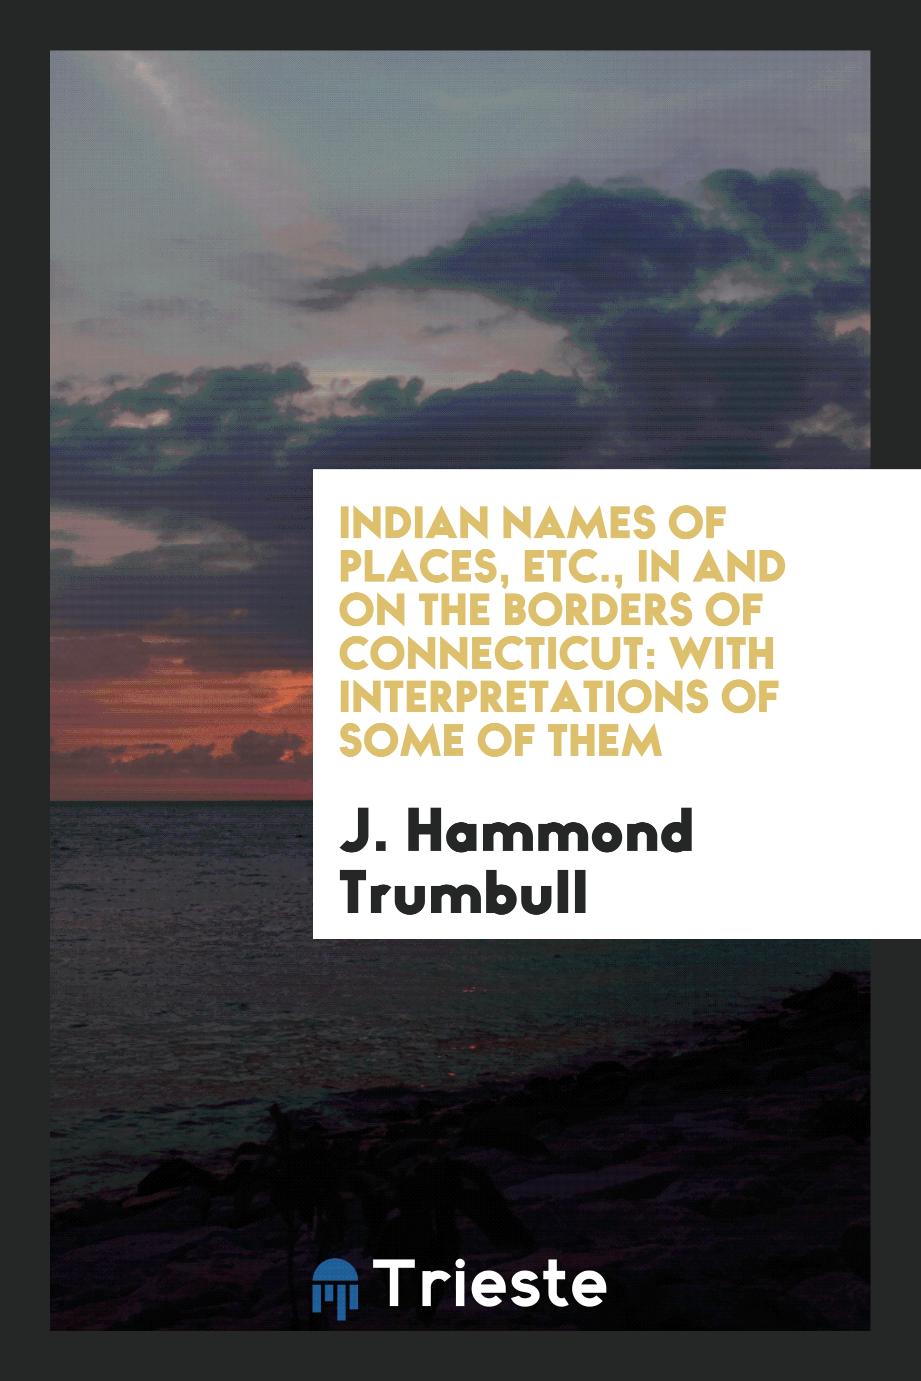 Indian names of places, etc., in and on the borders of Connecticut: with interpretations of some of them